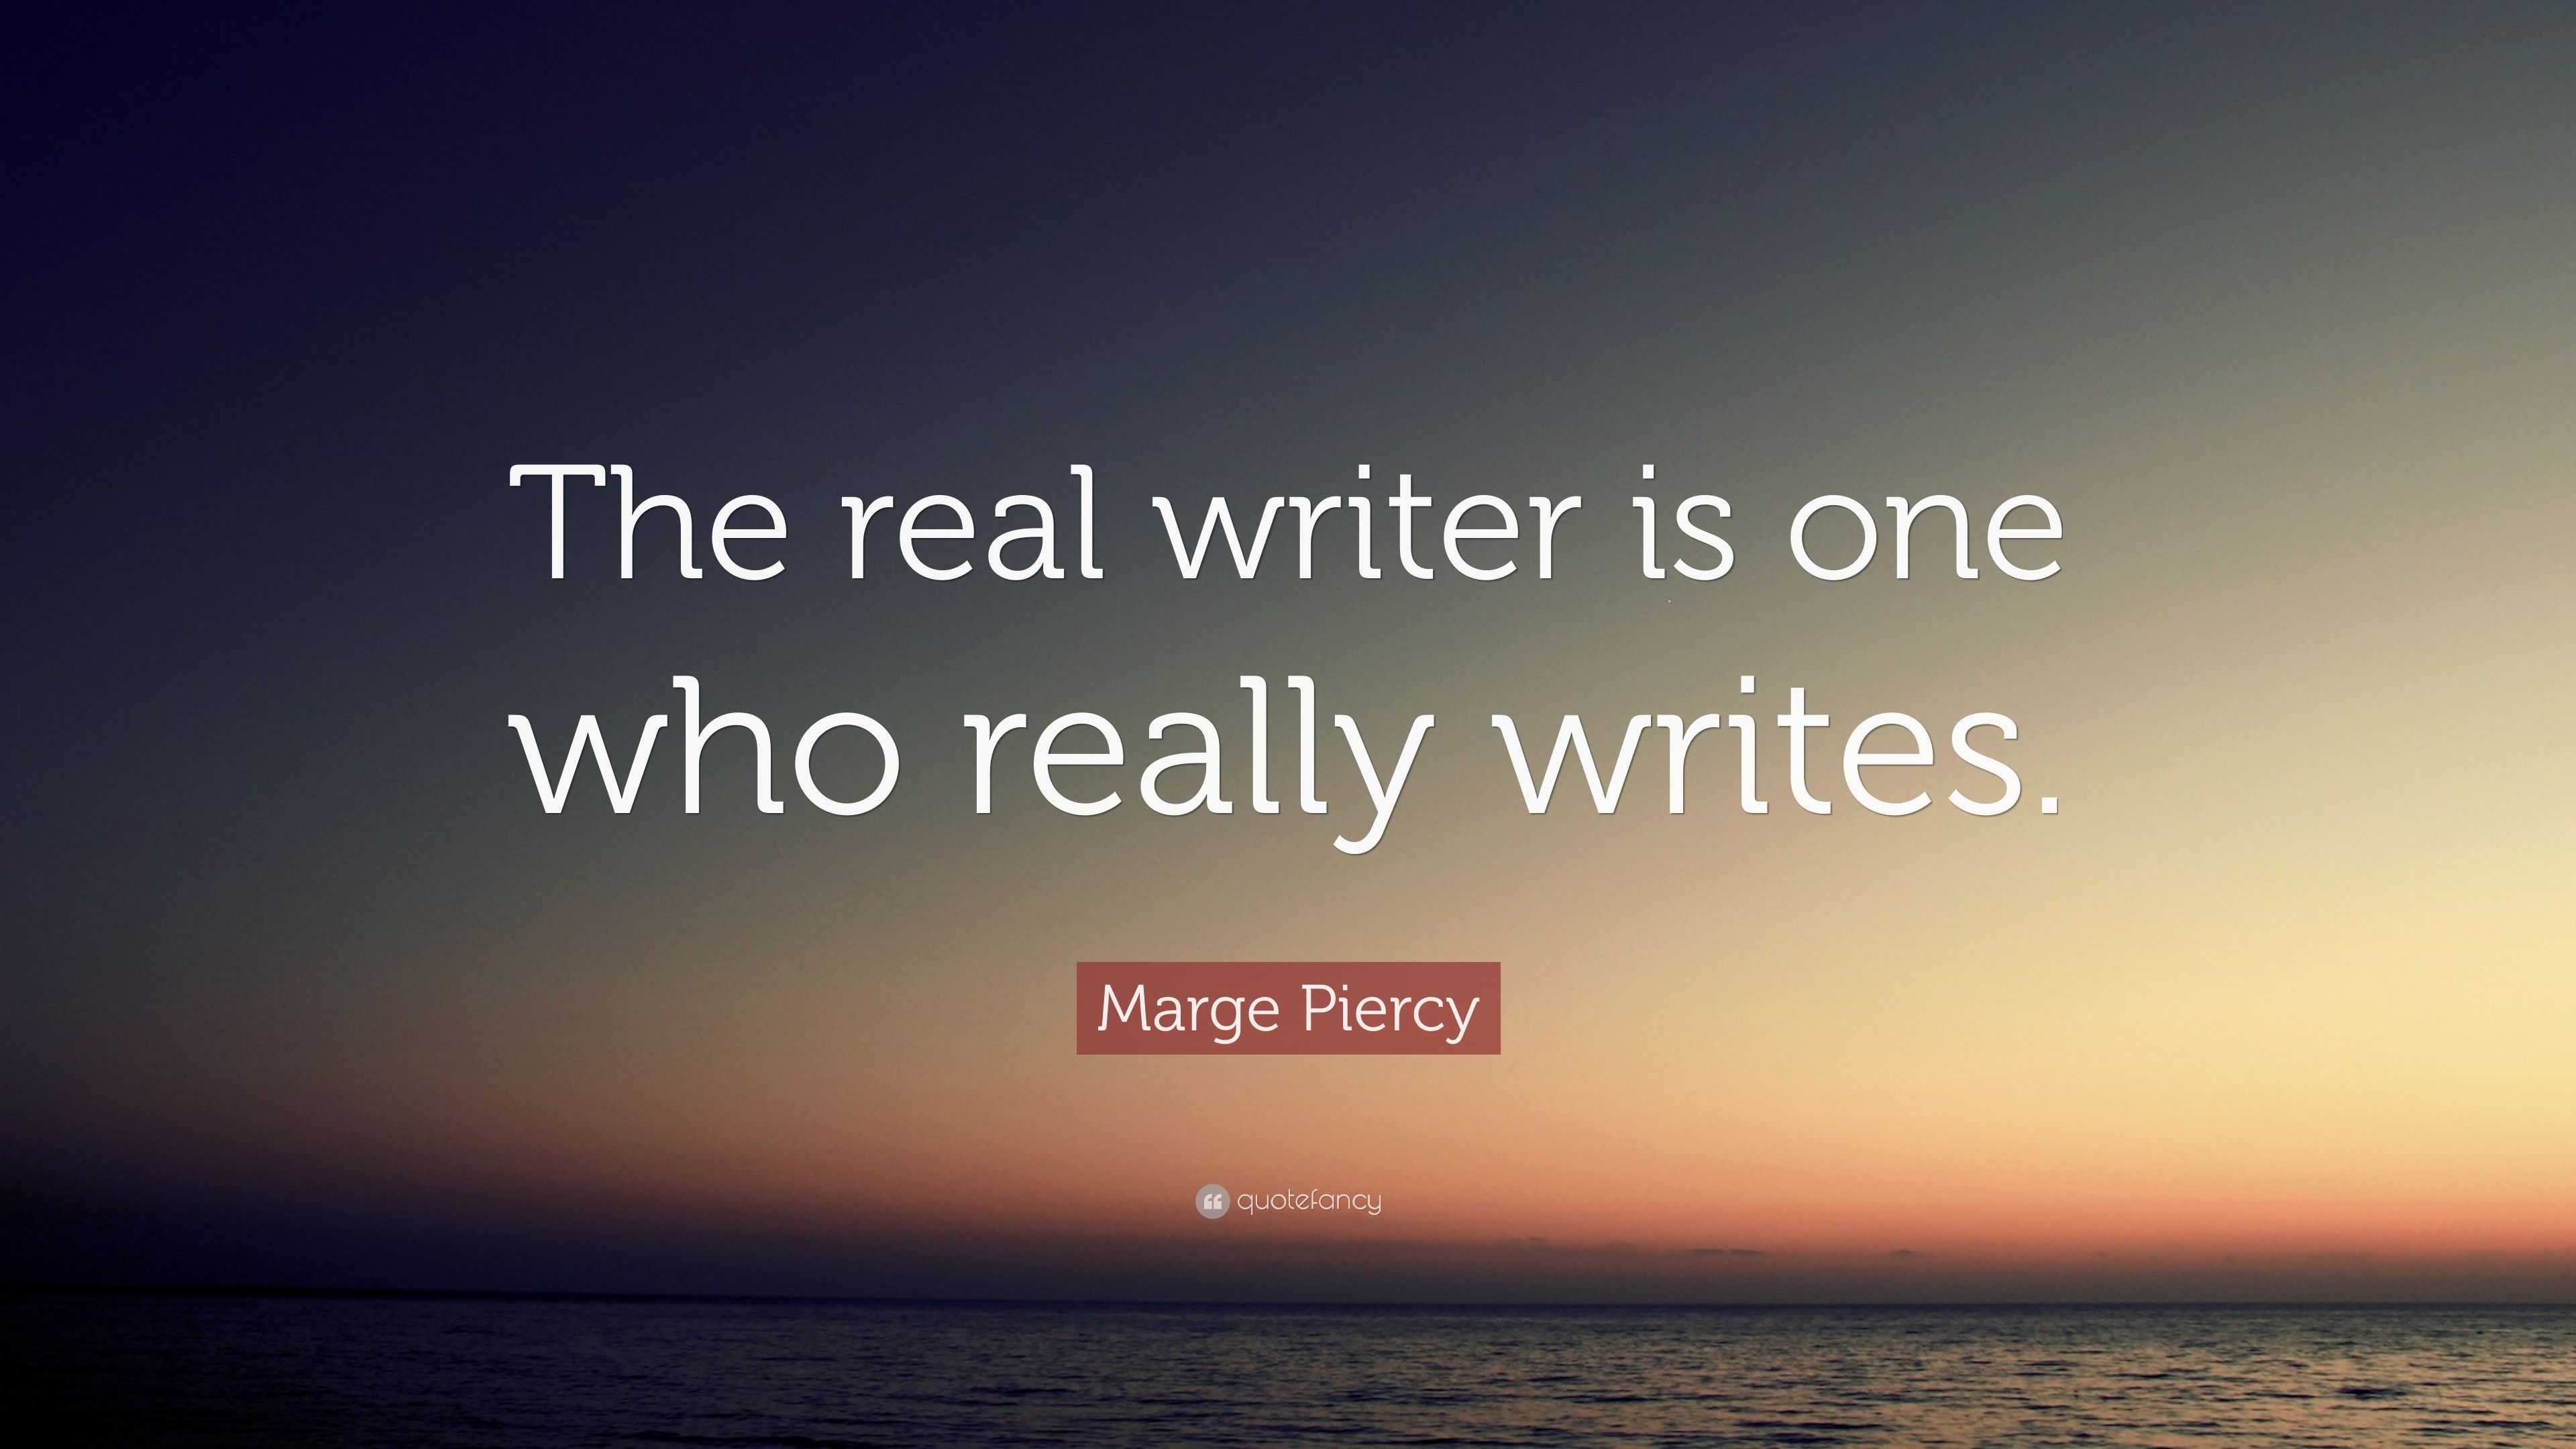 Marge Piercy Quote: “The real writer is one who really writes.”